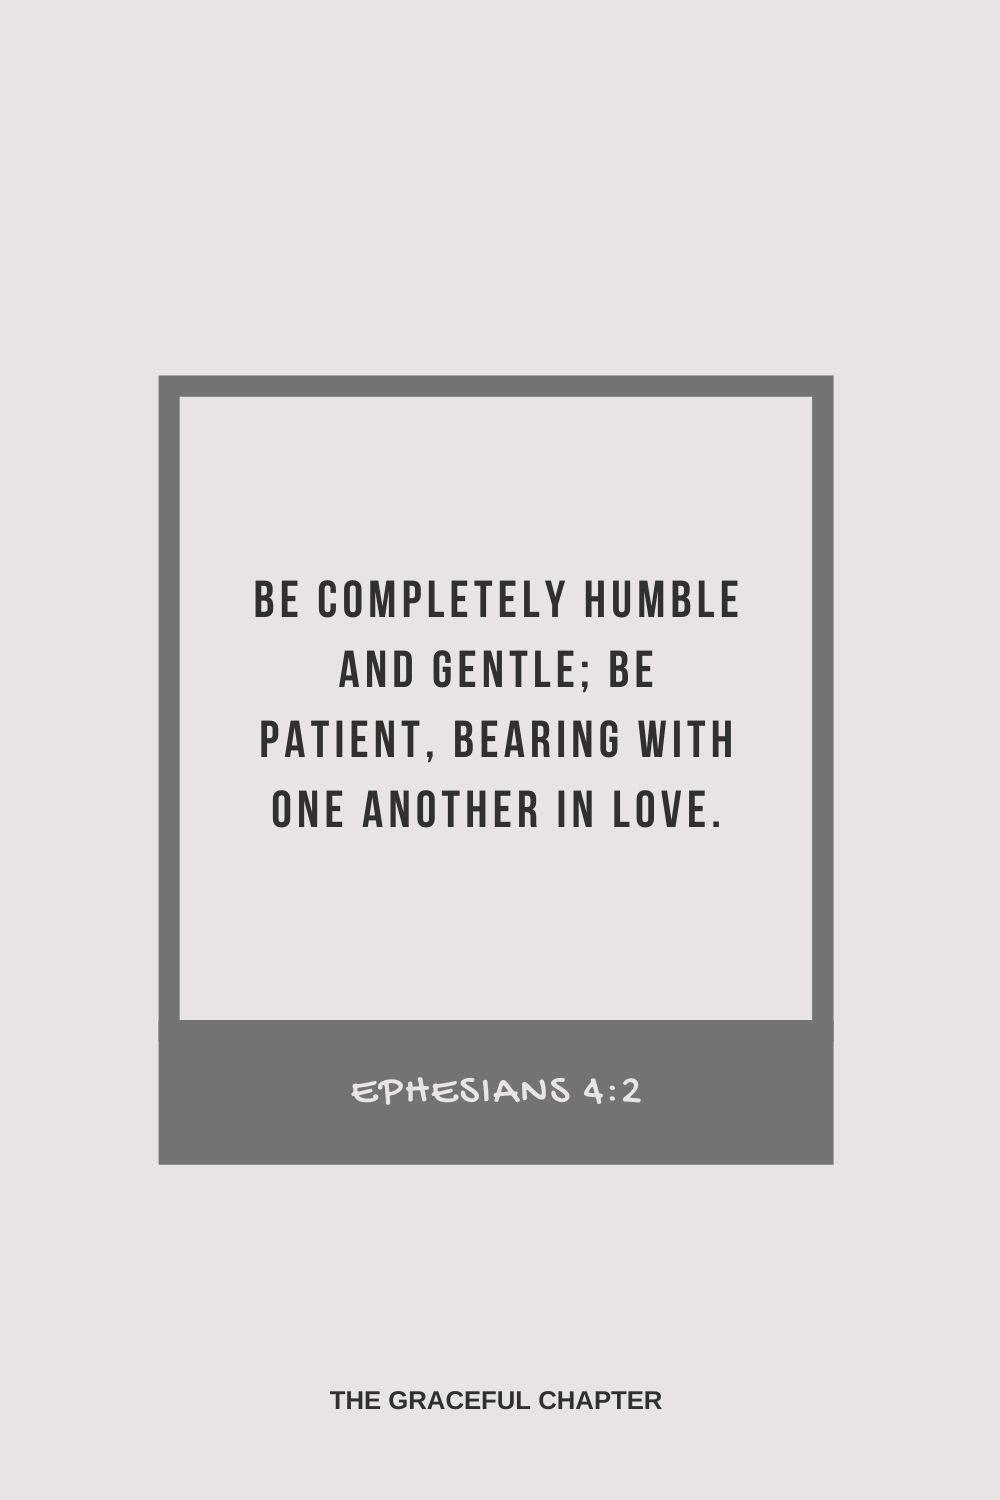 Be completely humble and gentle; be patient, bearing with one another in love. Ephesians 4:2